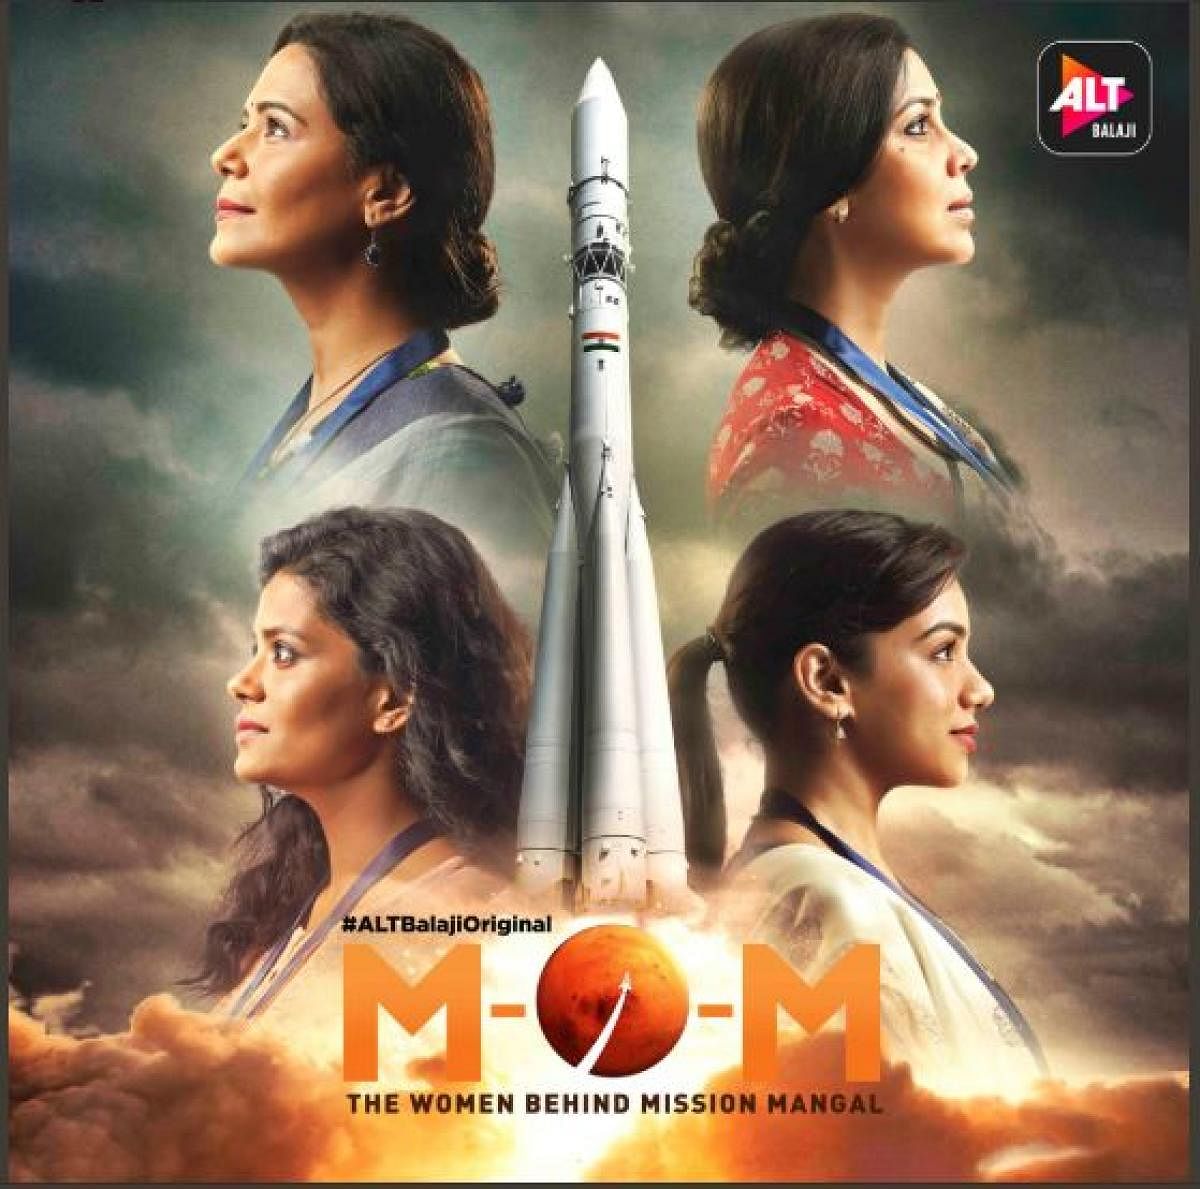 The poster, released last week by Alt Balaji, featured what appears to be a Russian Soyuz launch vehicle with the Indian flag superimposed on it. (Image source: ALT Balaji/Twitter )